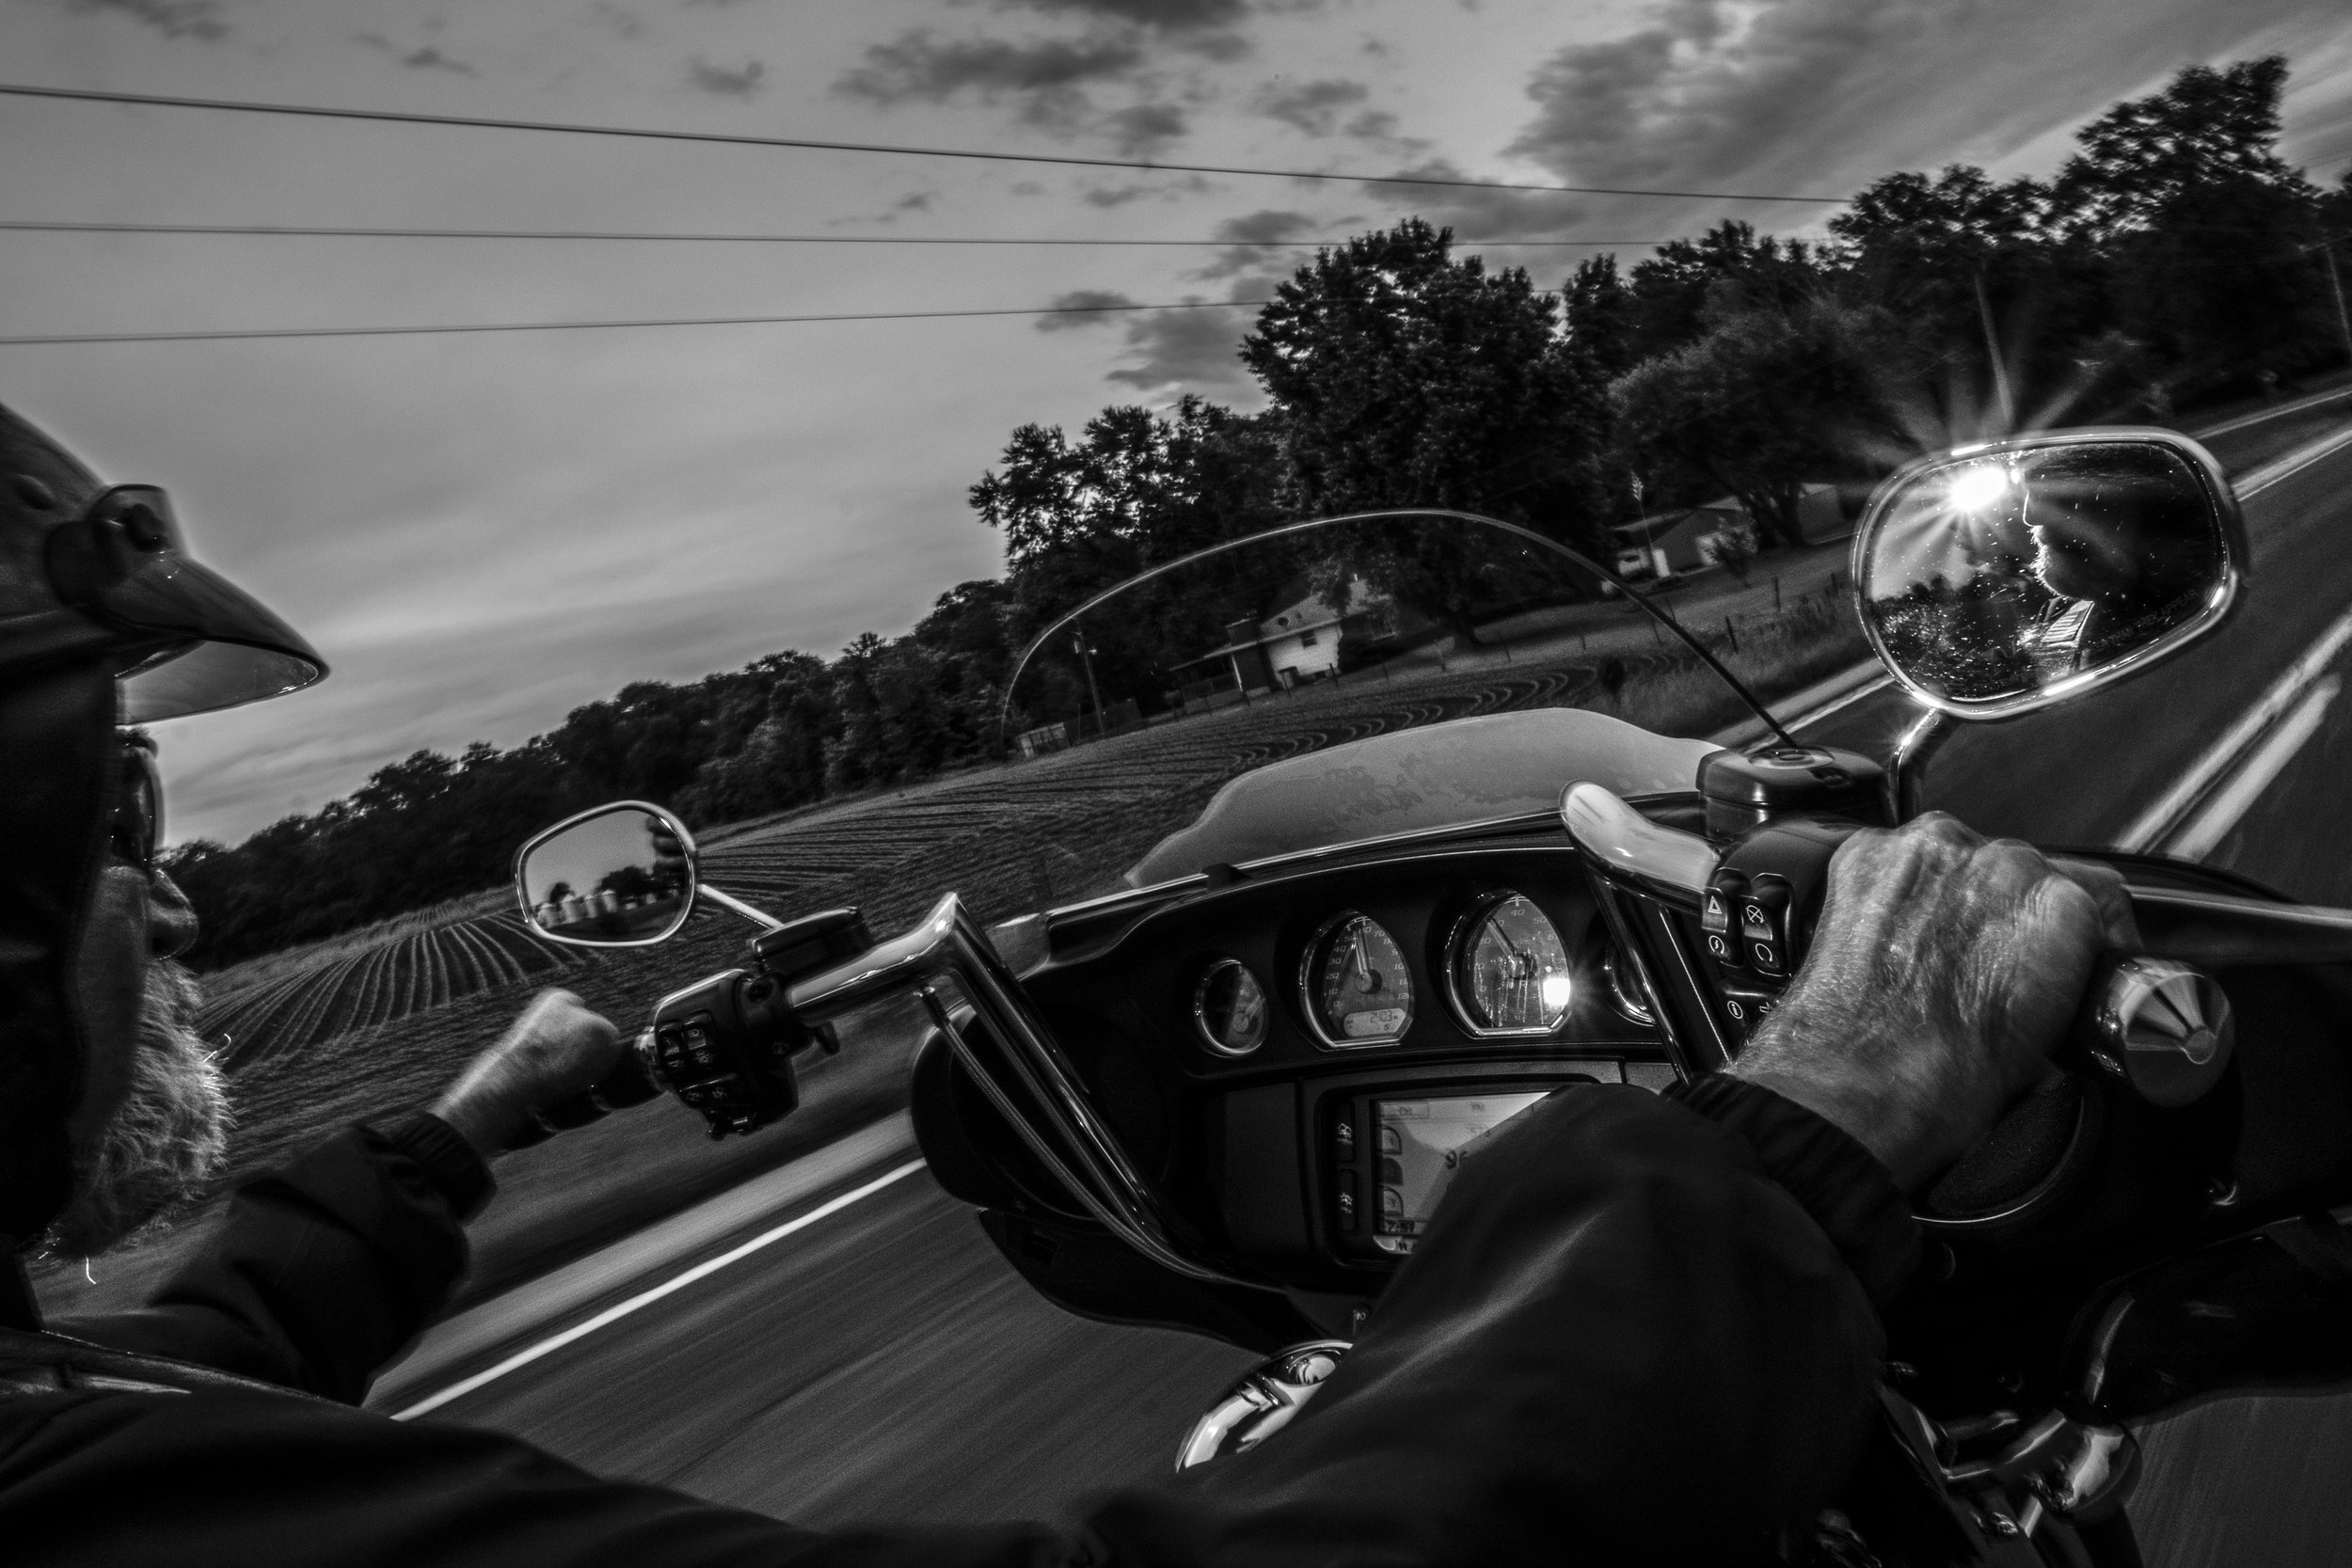  Patriot Guard Rider and Senior Ride Captain, Bill Walden, rides his motorcycle near Mexico Missouri on Friday, Jun. 21, 2019. Bill has escorted over 500 veteran funerals during his time with the organization. 